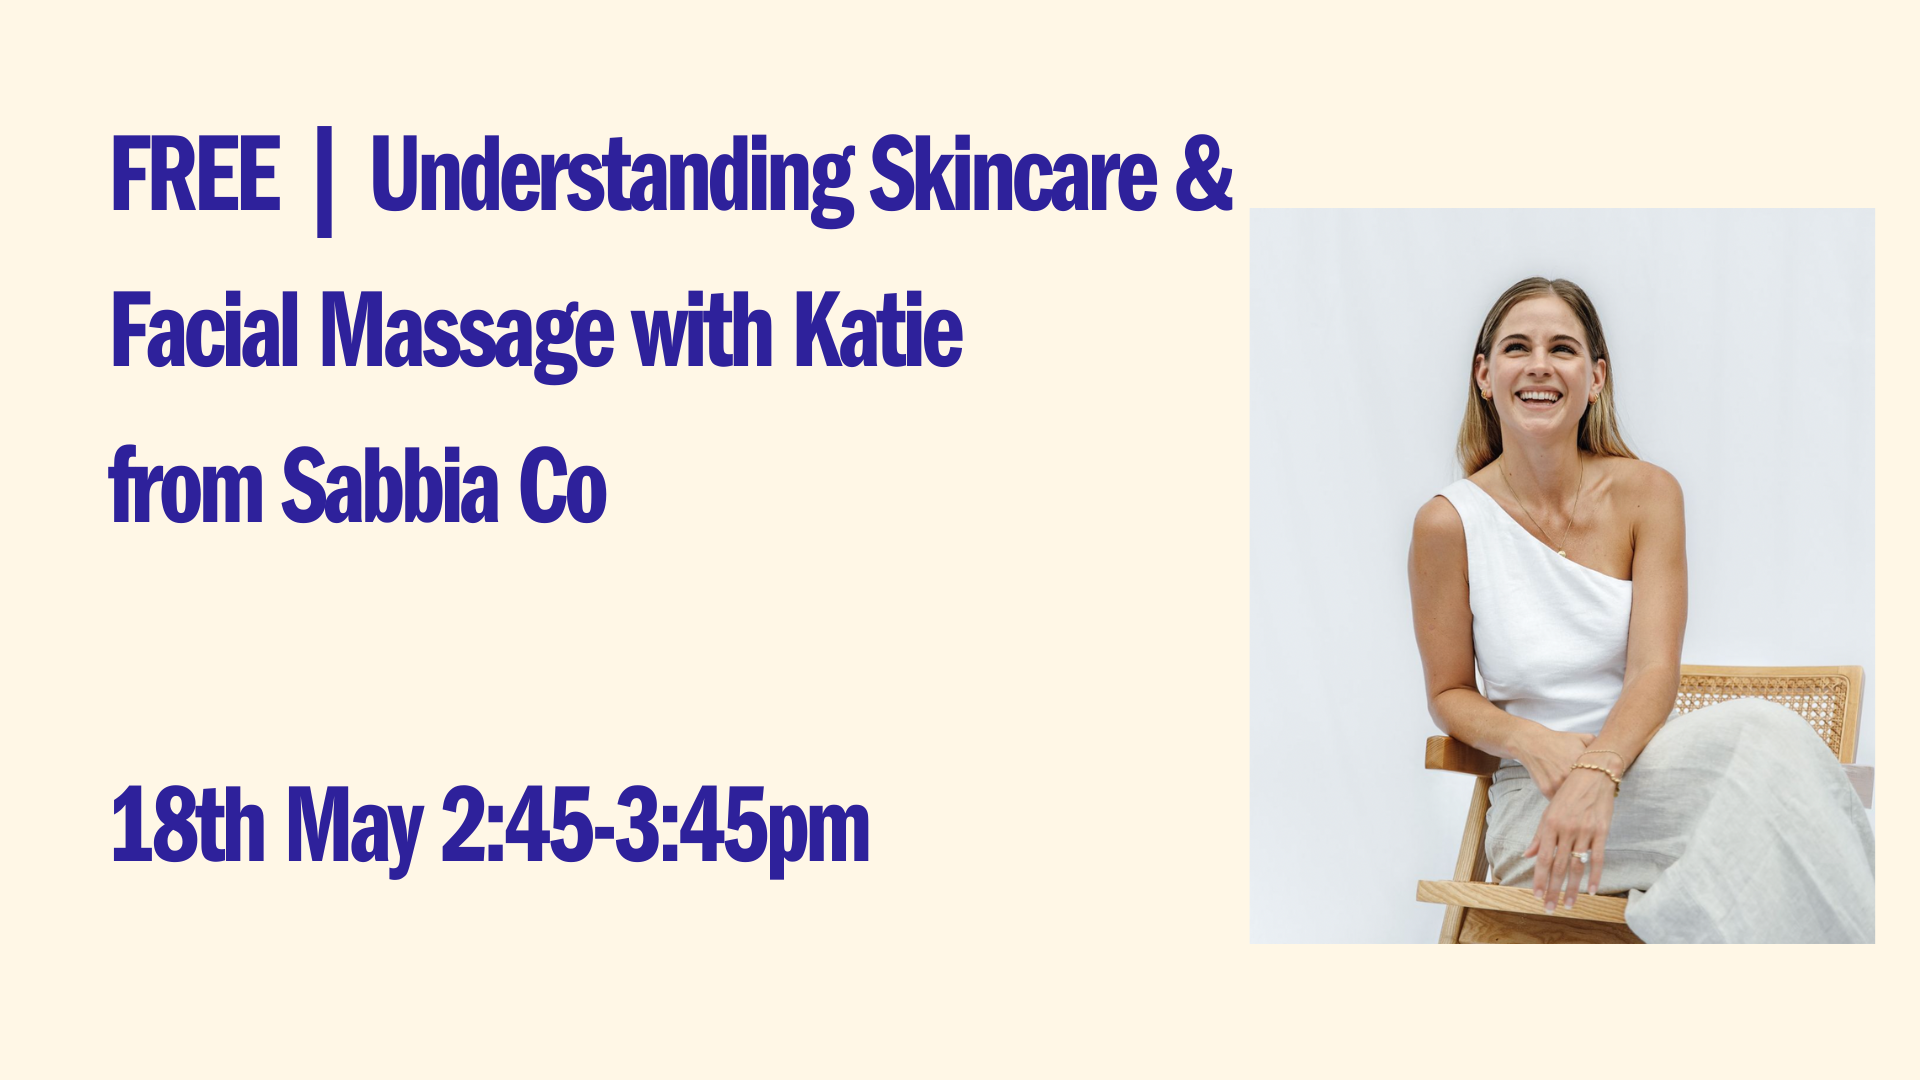 FREE | Understanding Skincare & Facial Massage with Katie from Sabbia Co - May 18th